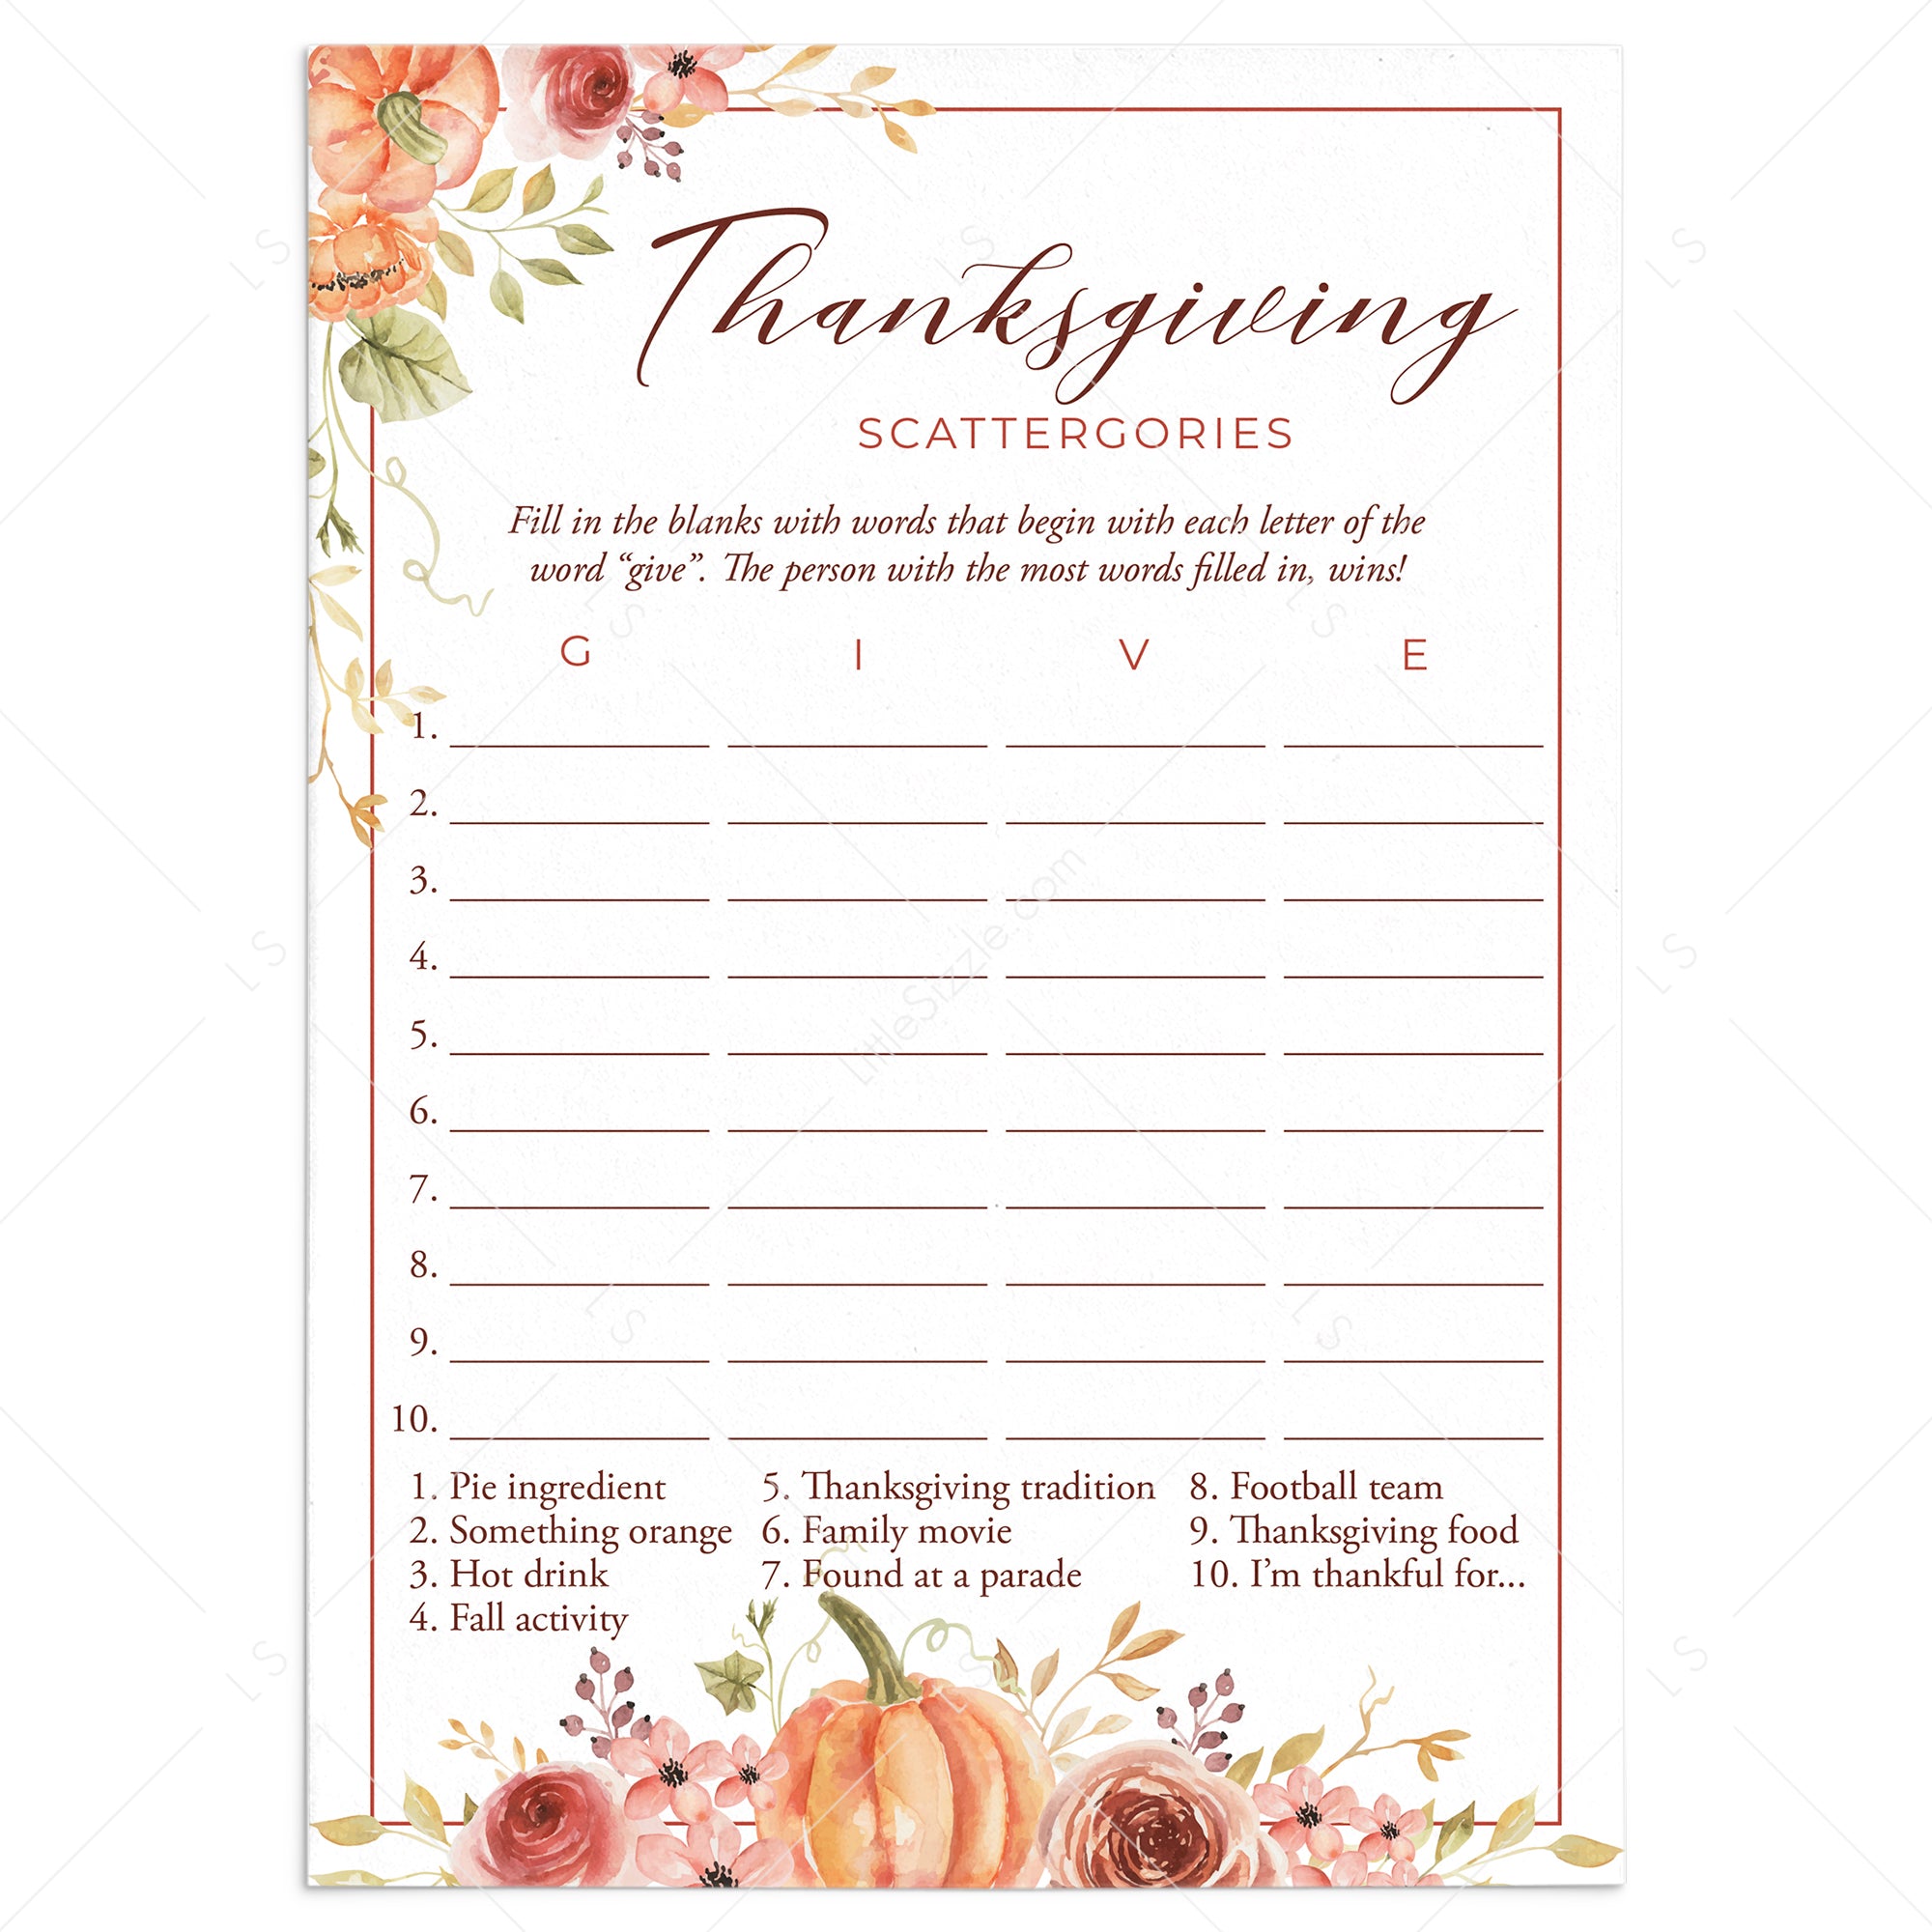 Thanksgiving Party Game Scattergories Printable by LittleSizzle